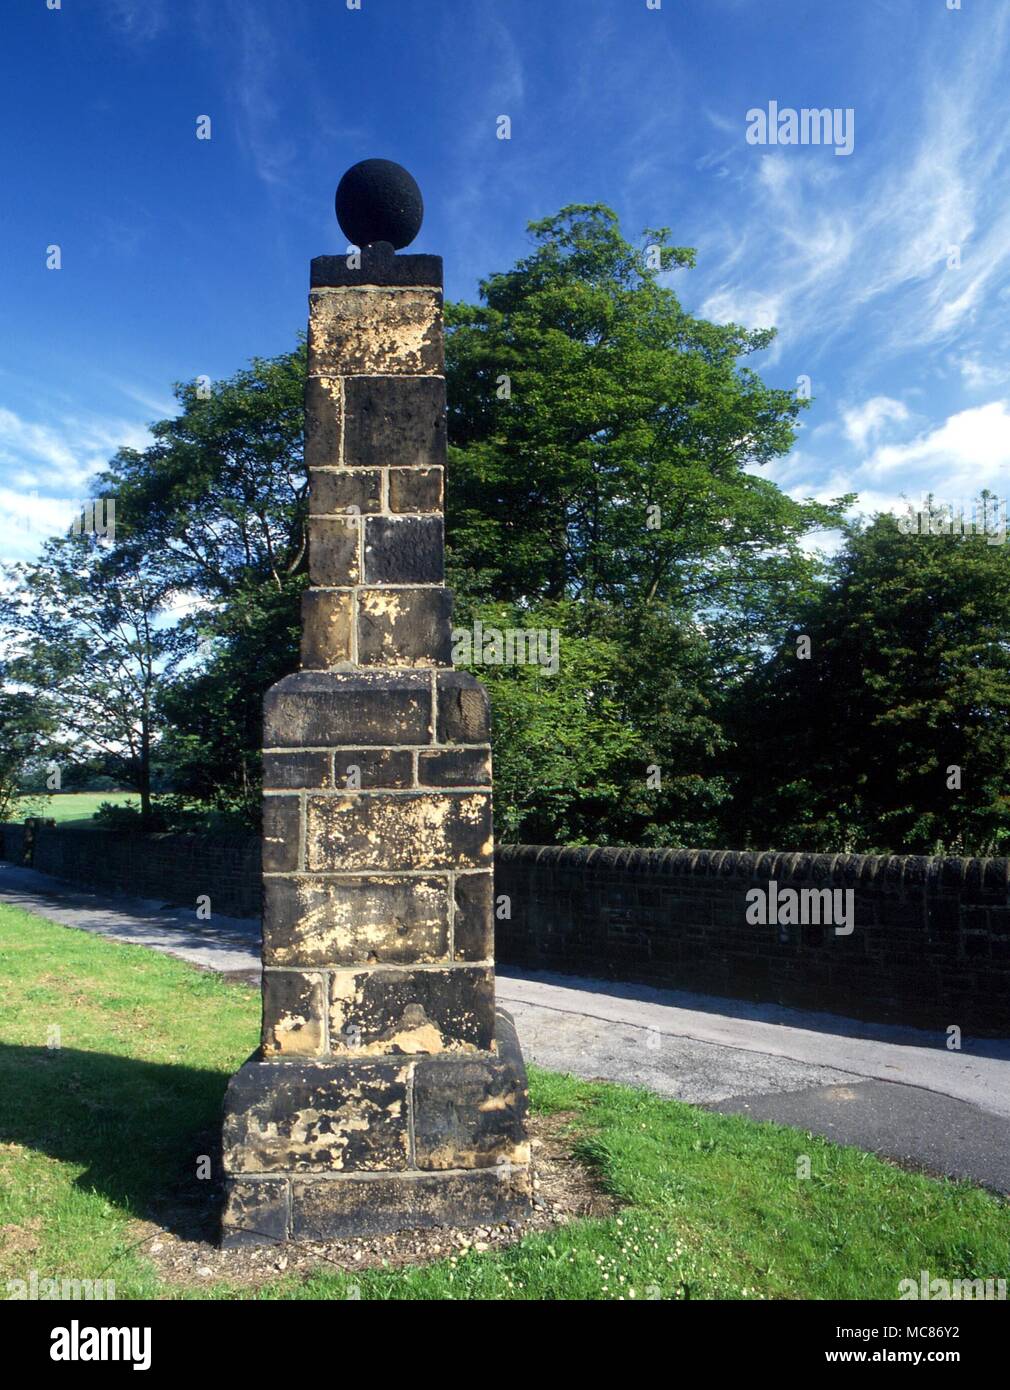 BRITISH MYTHOLOGY The 'dumb steeple' near Brighouse - probably a corruption of 'domed steeple'. Its purpose is no longer known, but in the 18th century it was used as a meeting point for the Ludites and other revolutionaries Stock Photo